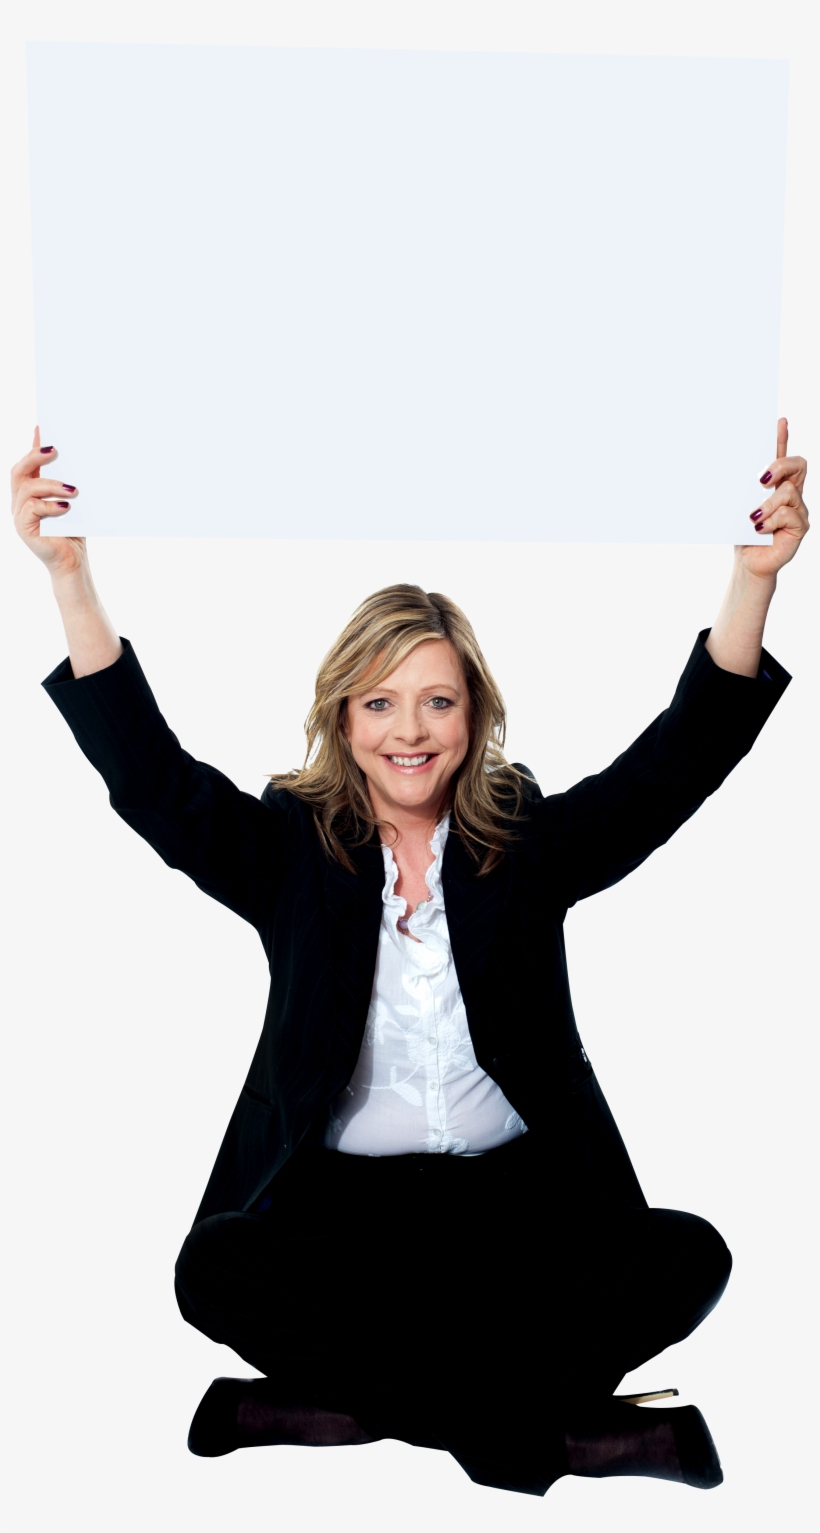 Girl Holding Banner Png Image - Holding Up A Whiteboard, transparent png #908610